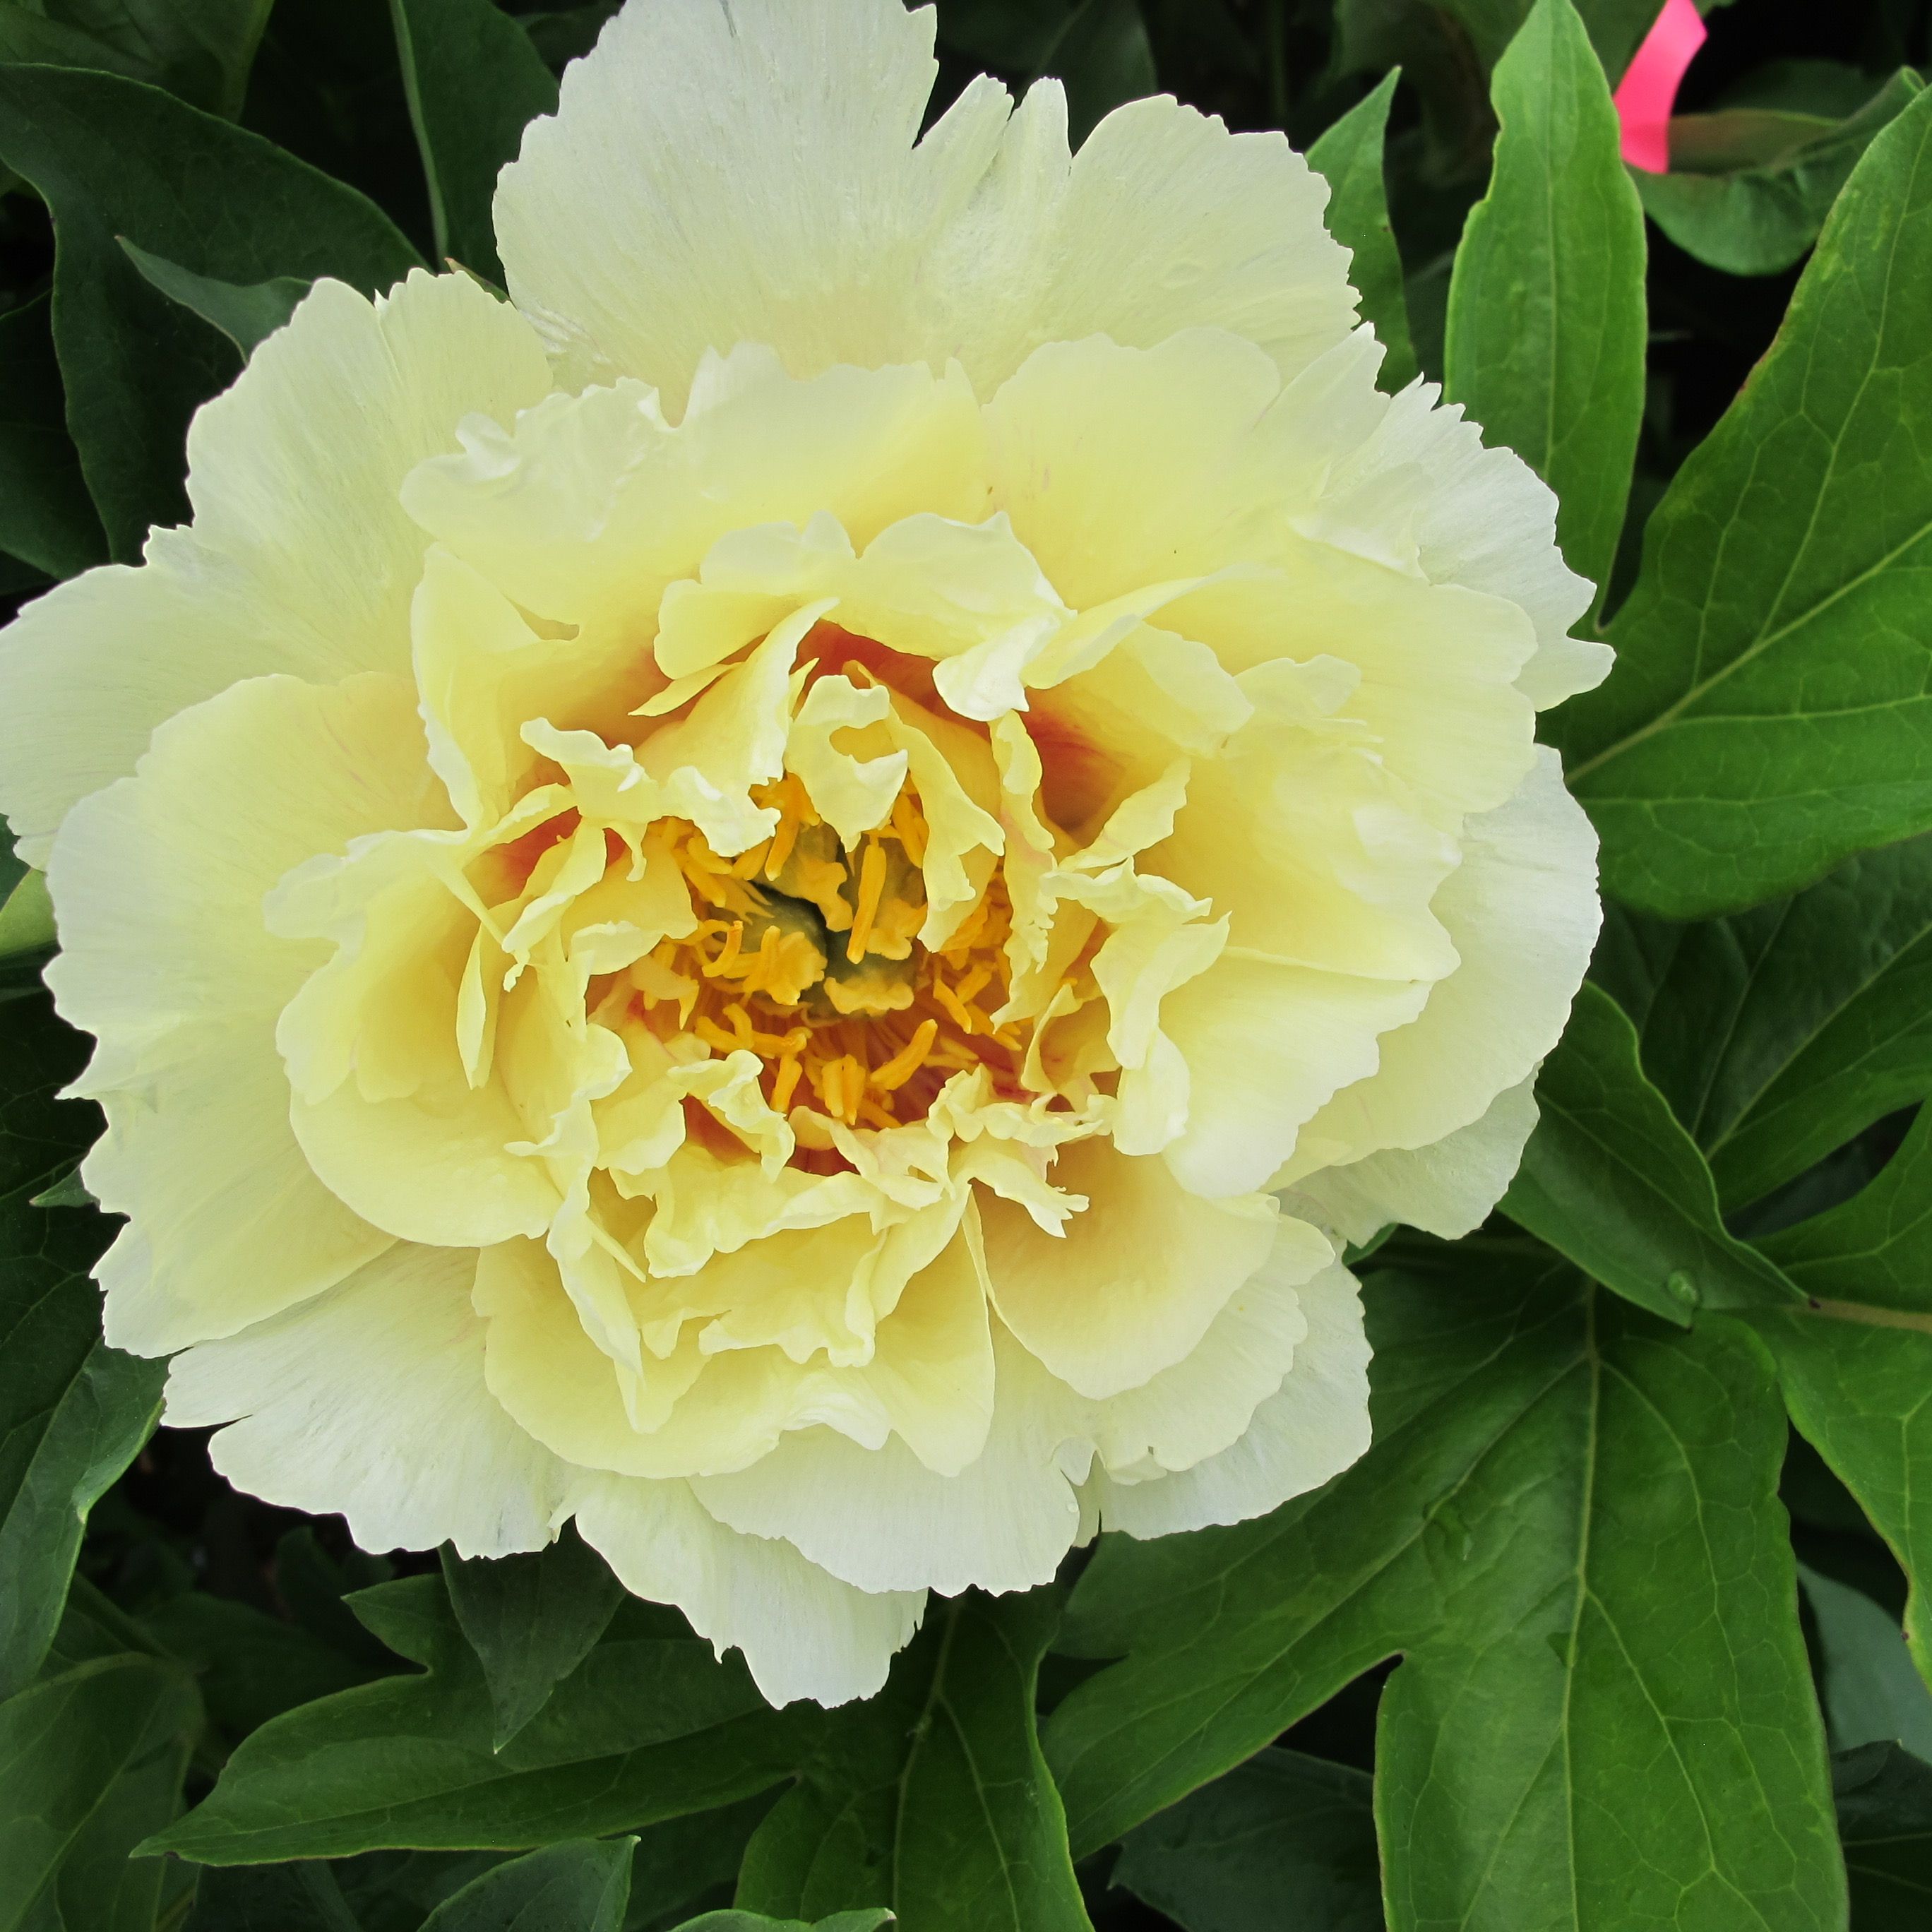 images/plants/paeonia/pae-golden-ticket/pae-golden-ticket-0002.JPG